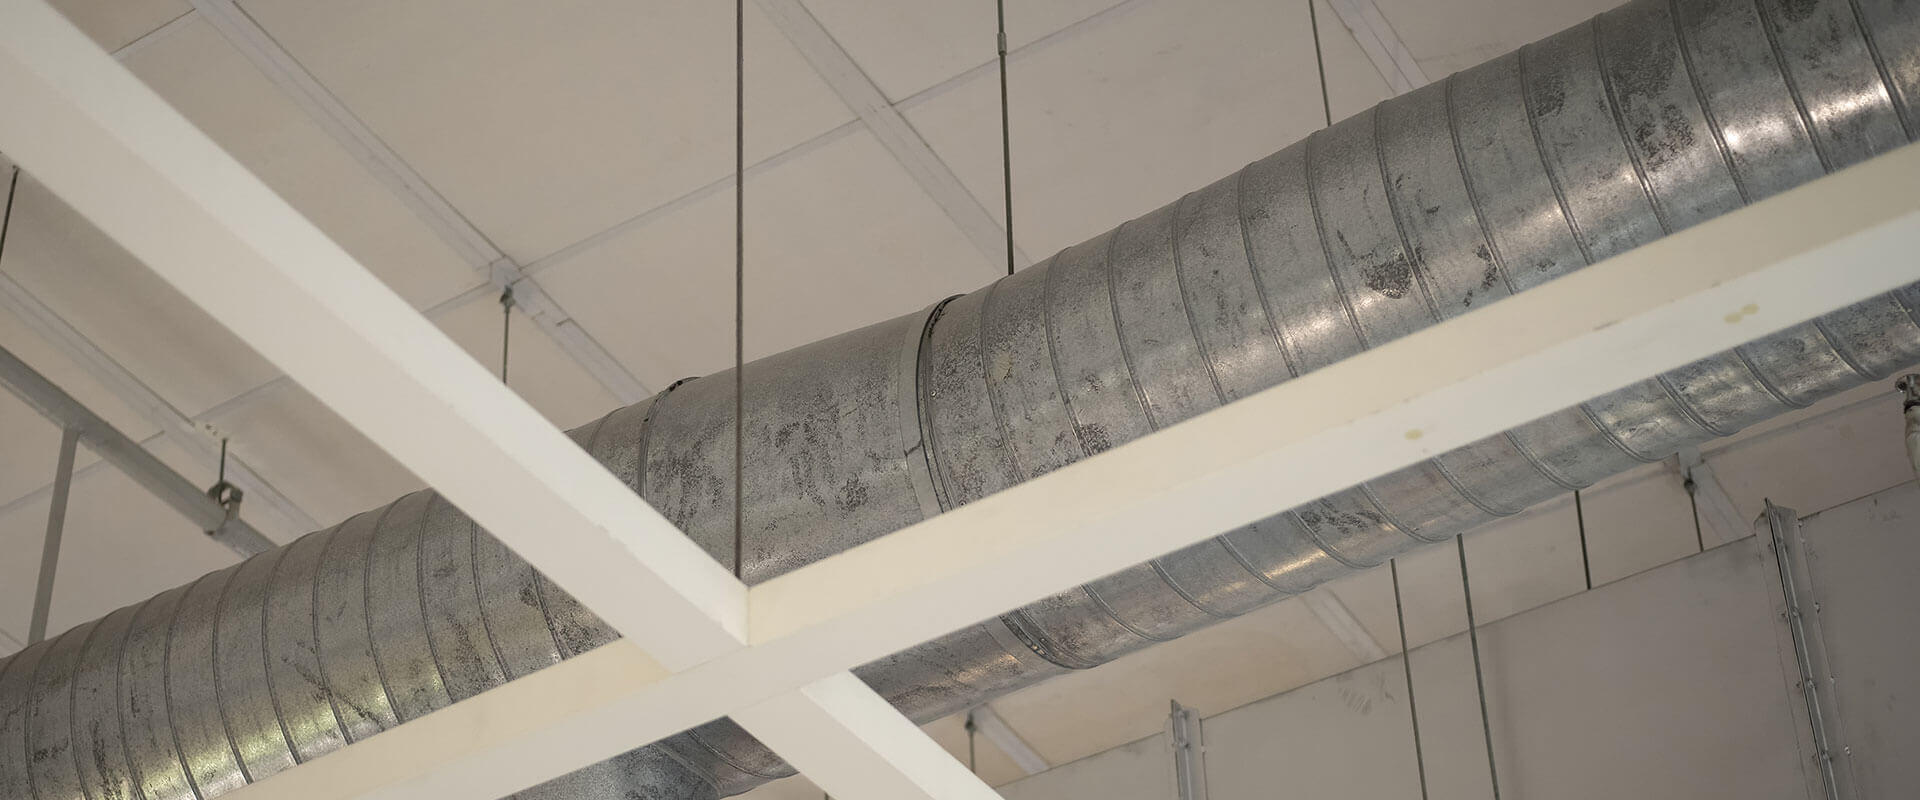 Ductwork Services In Rockwall, Wylie, Garland, Dallas, TX, And Surrounding Areas